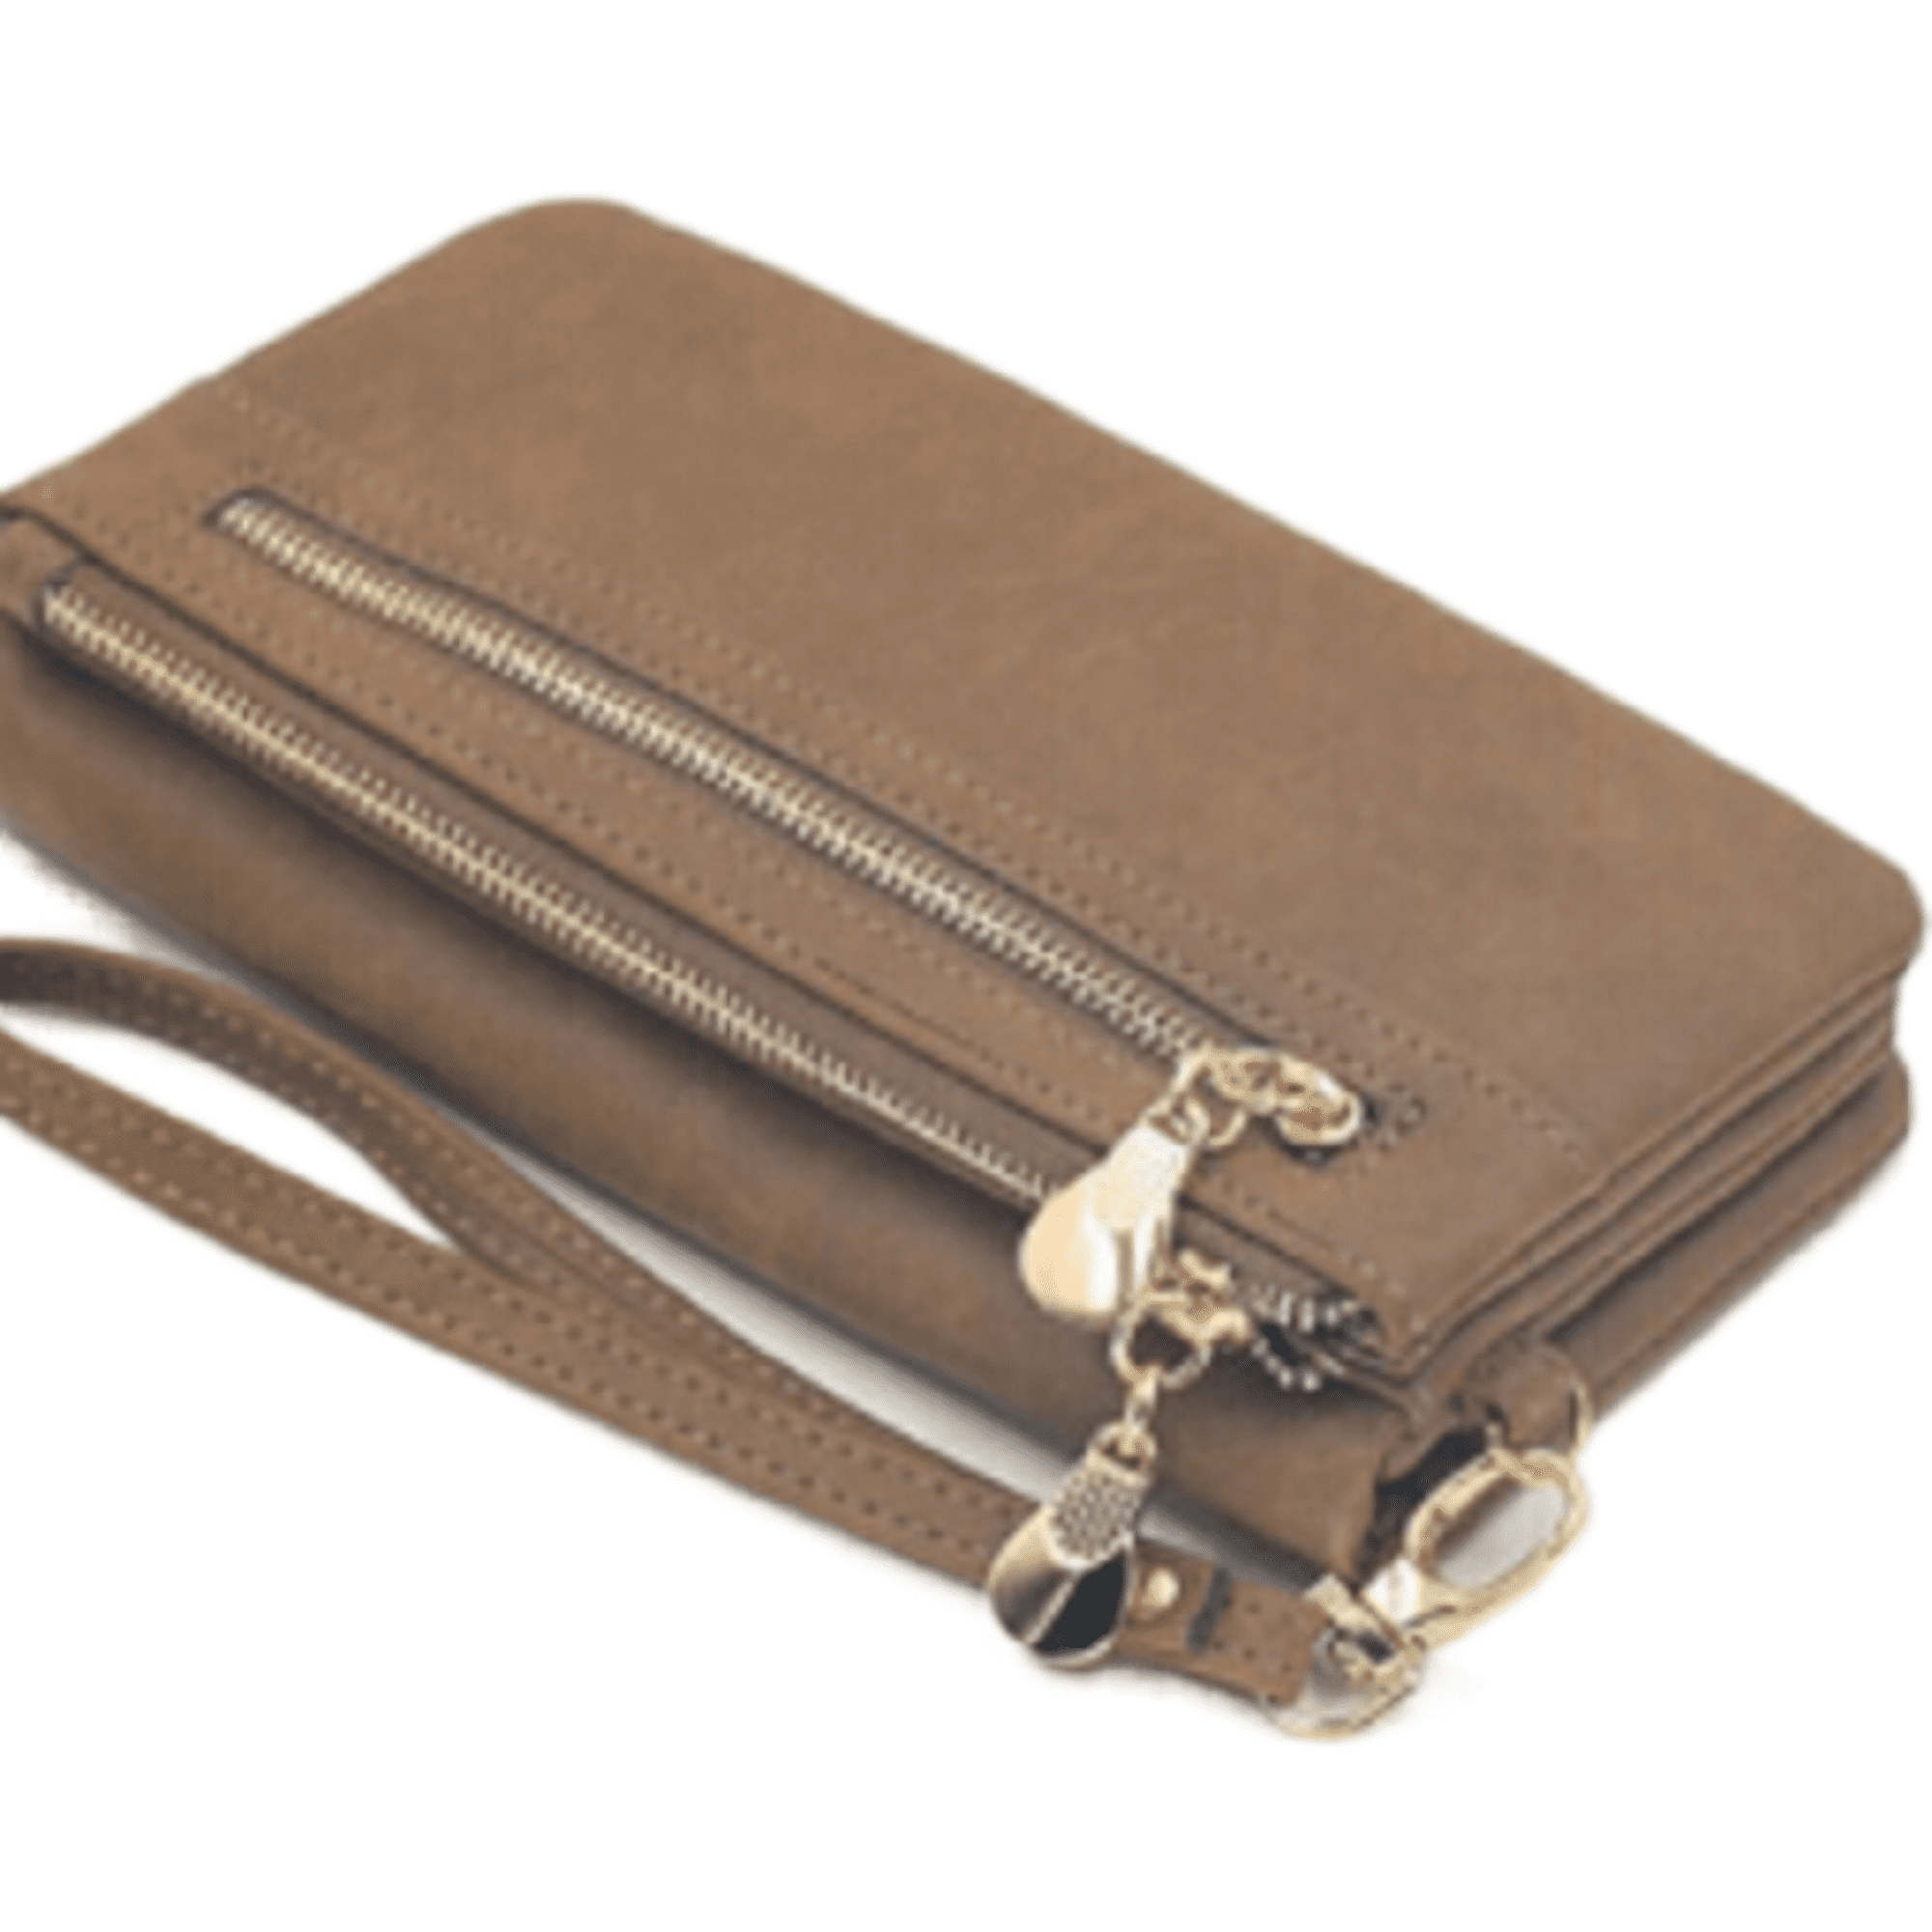 CONTACT'S Vintage Men's Clutch Bag RFID Genuine Leather Clutch Wallet Bag  Casual Long Purse Large Capacity Travel Handbag Male